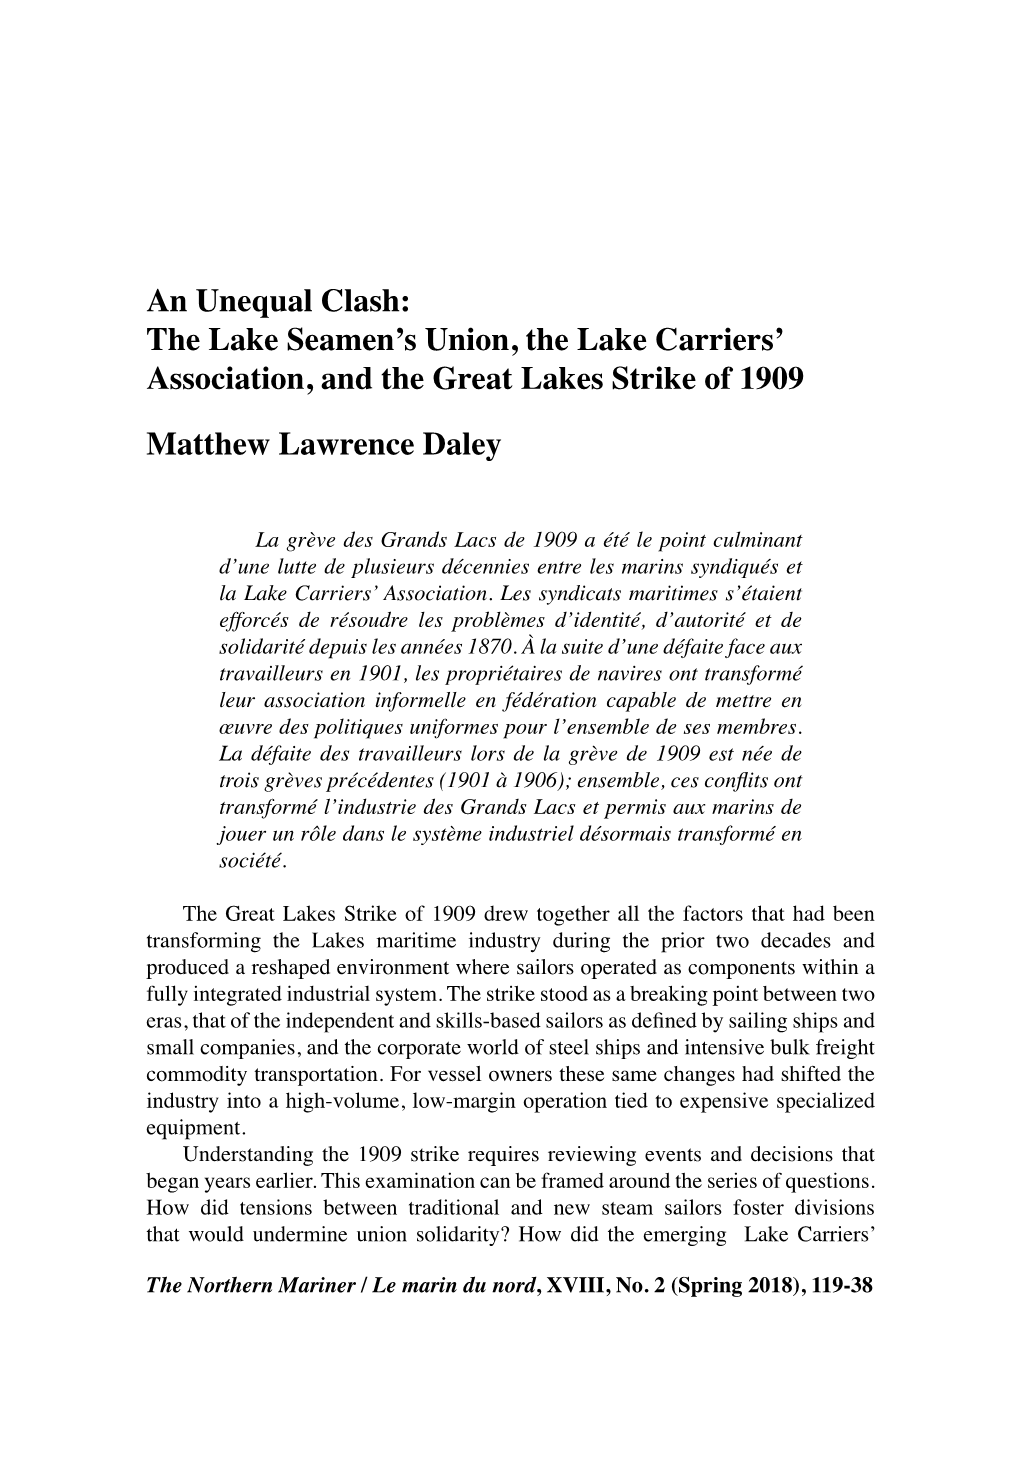 The Lake Seamen's Union, the Lake Carriers' Association, and the Great